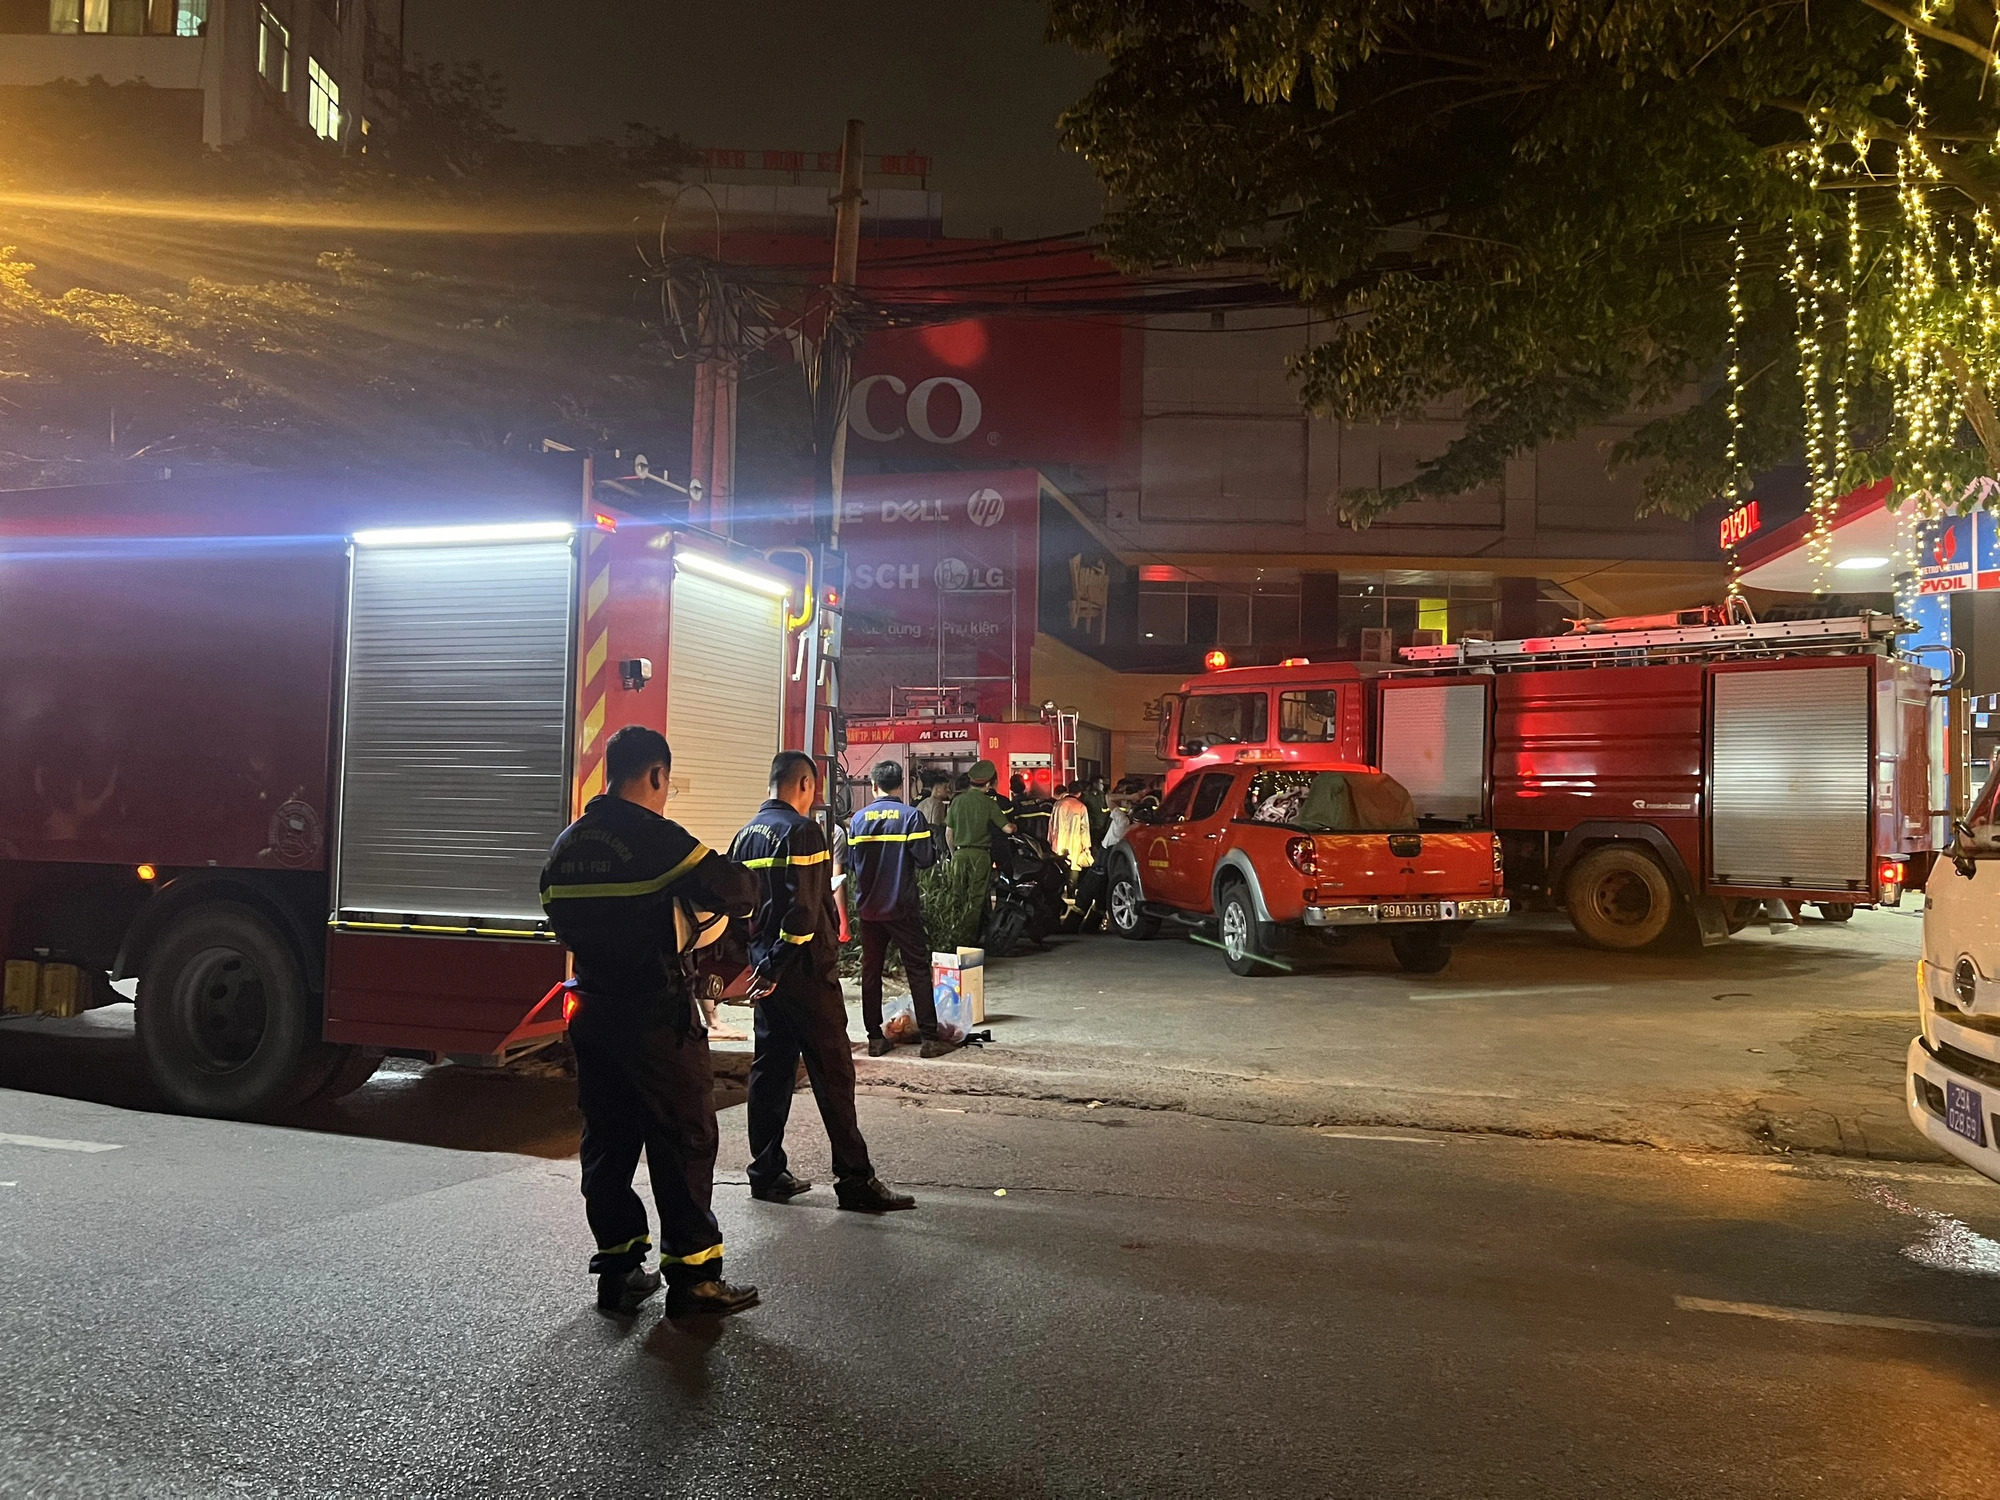 Over 50 people evacuated after fire hits 4-story building in Hanoi